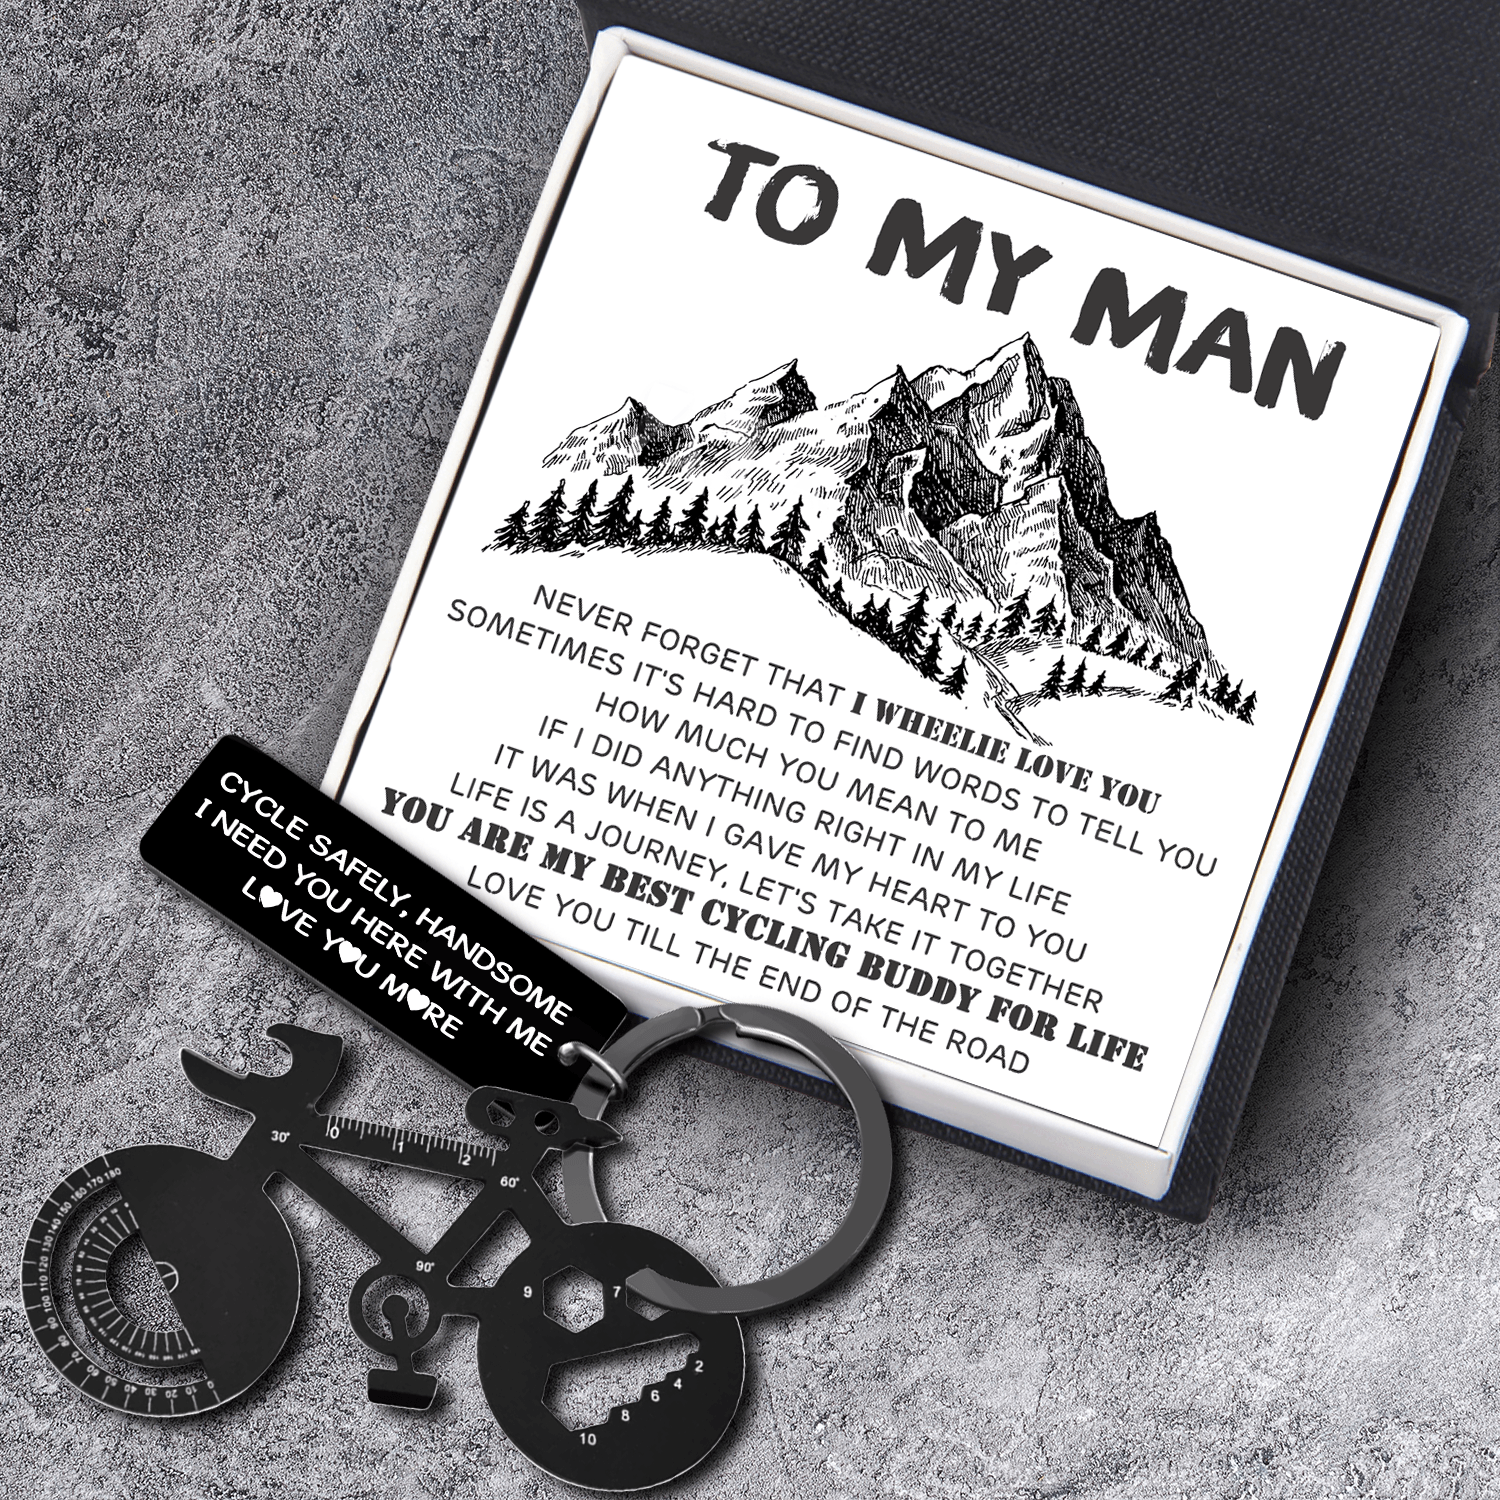 Jet Black Cycling Multi-tool Keychain - Cycling - To My Man - Life Is A Journey - Augkzo26002 - Gifts Holder